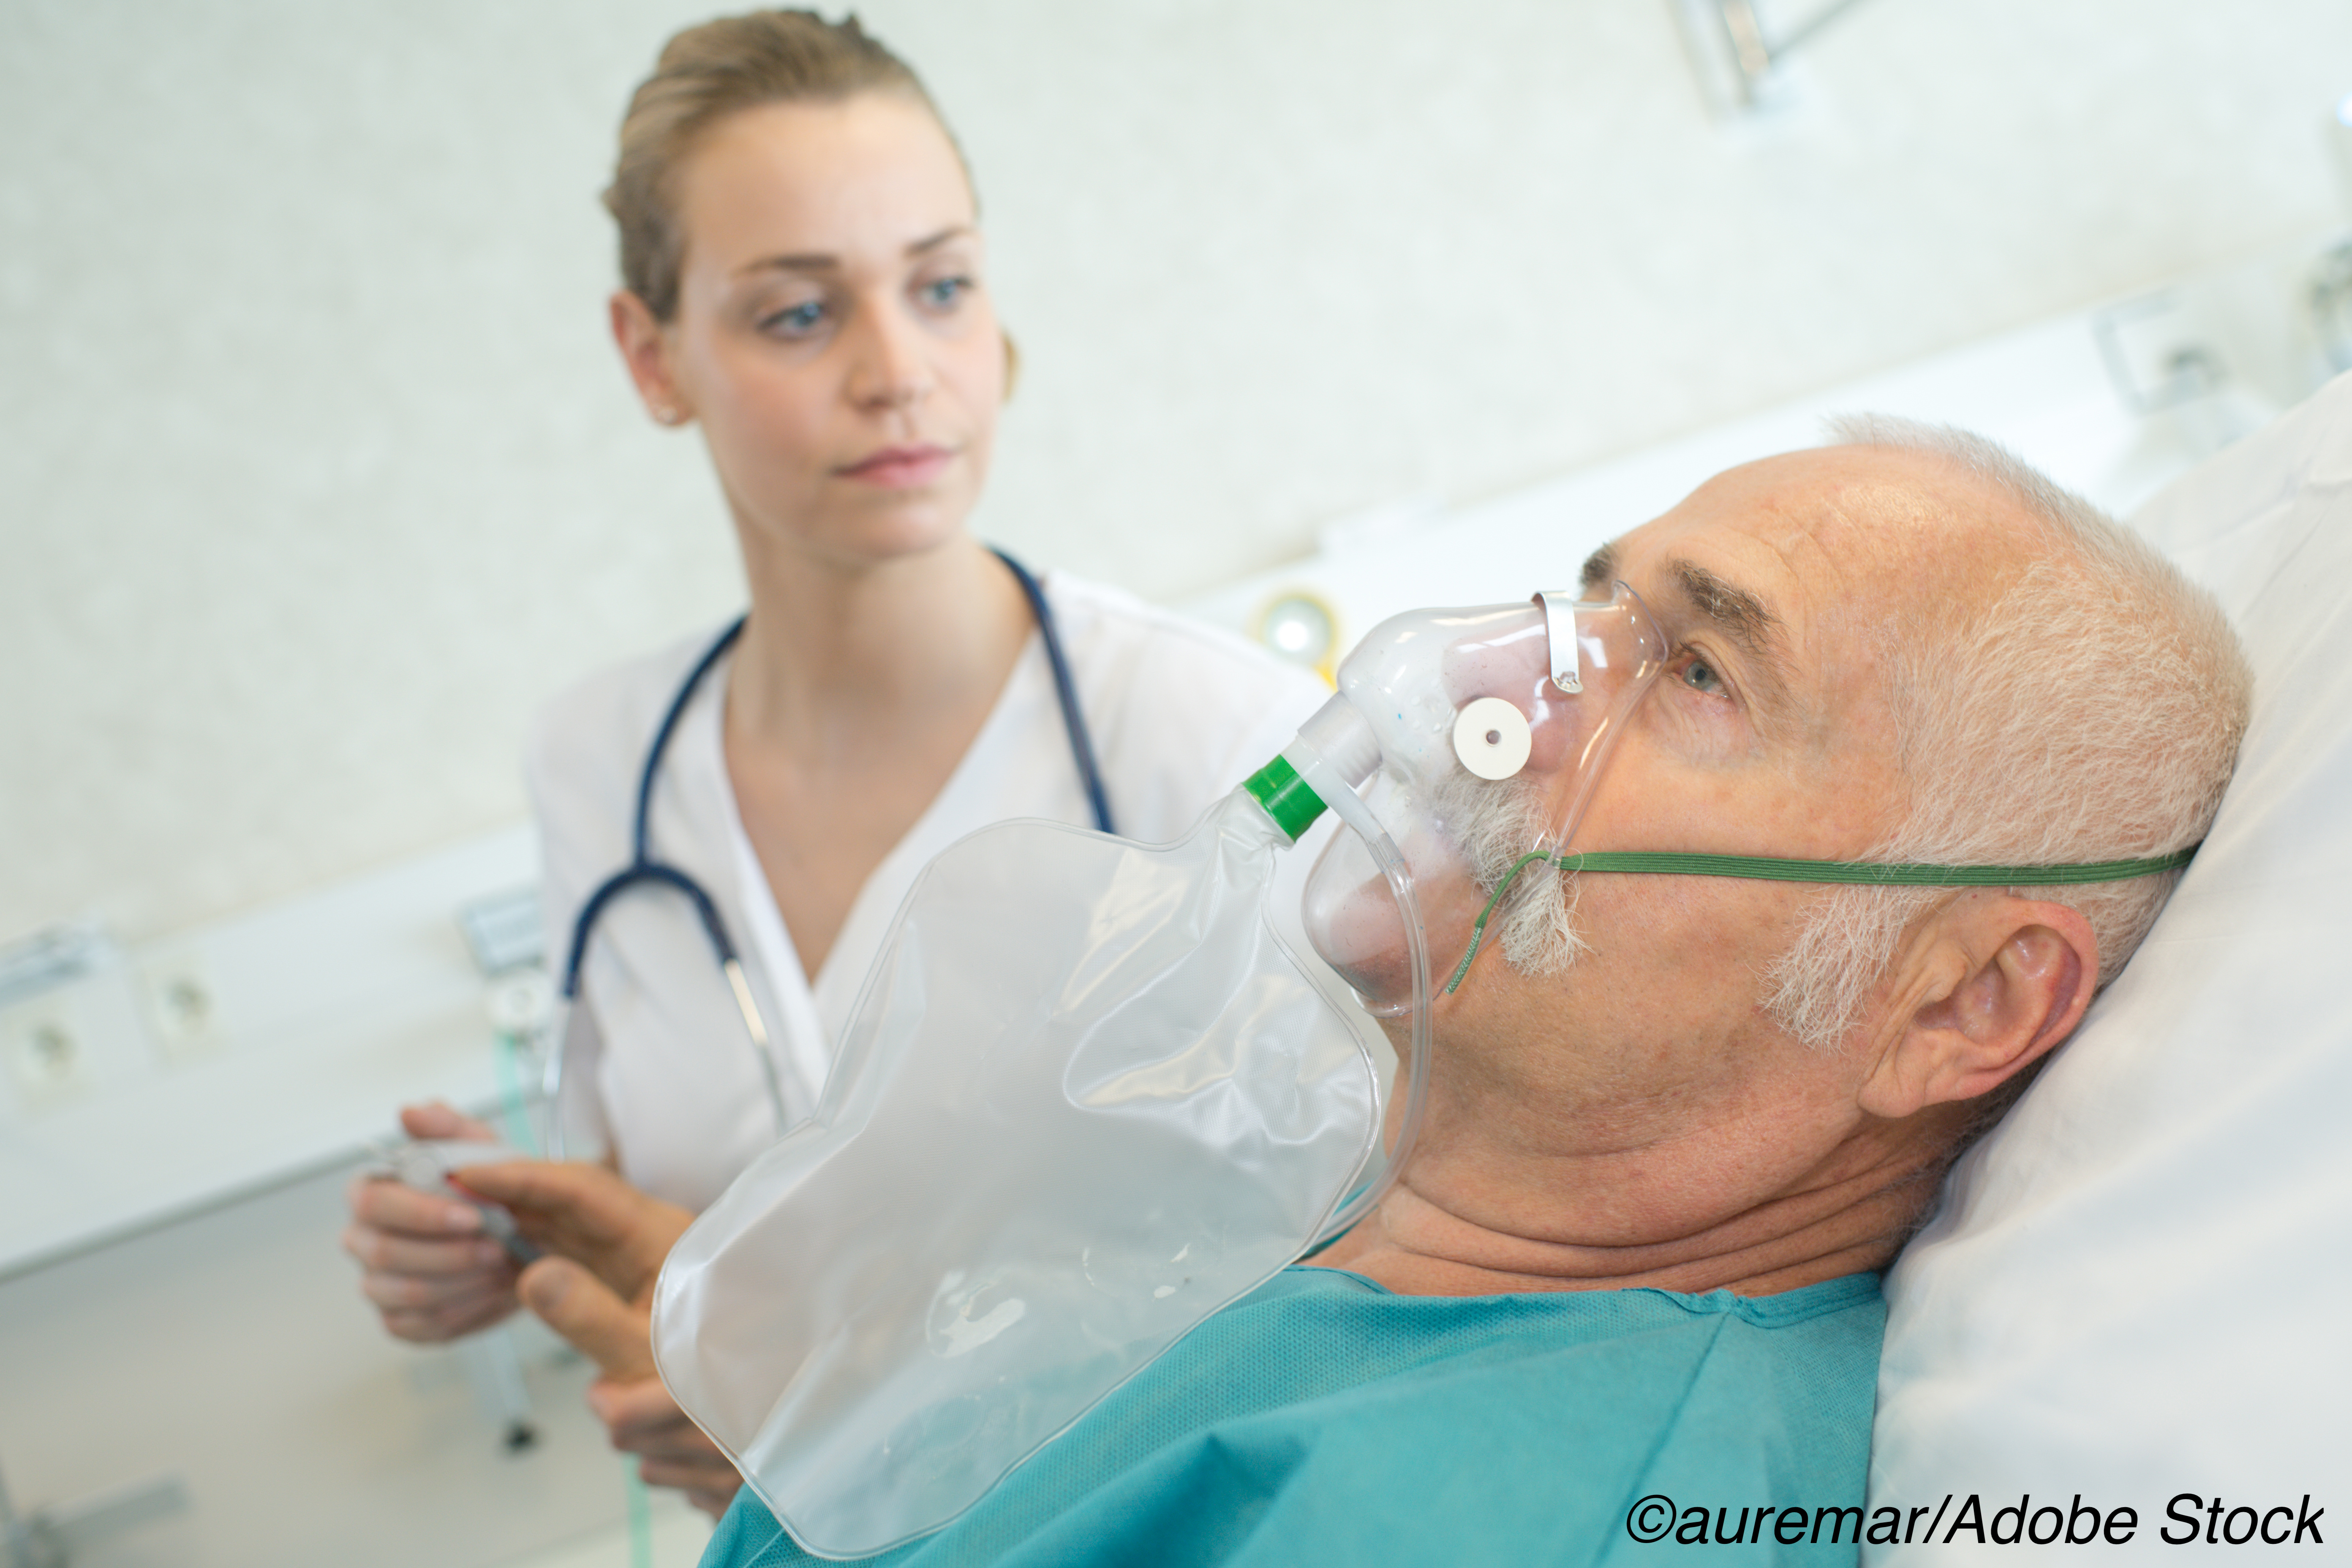 COPD: Triple Therapy Demonstrates Efficacy in ETHOS Trial